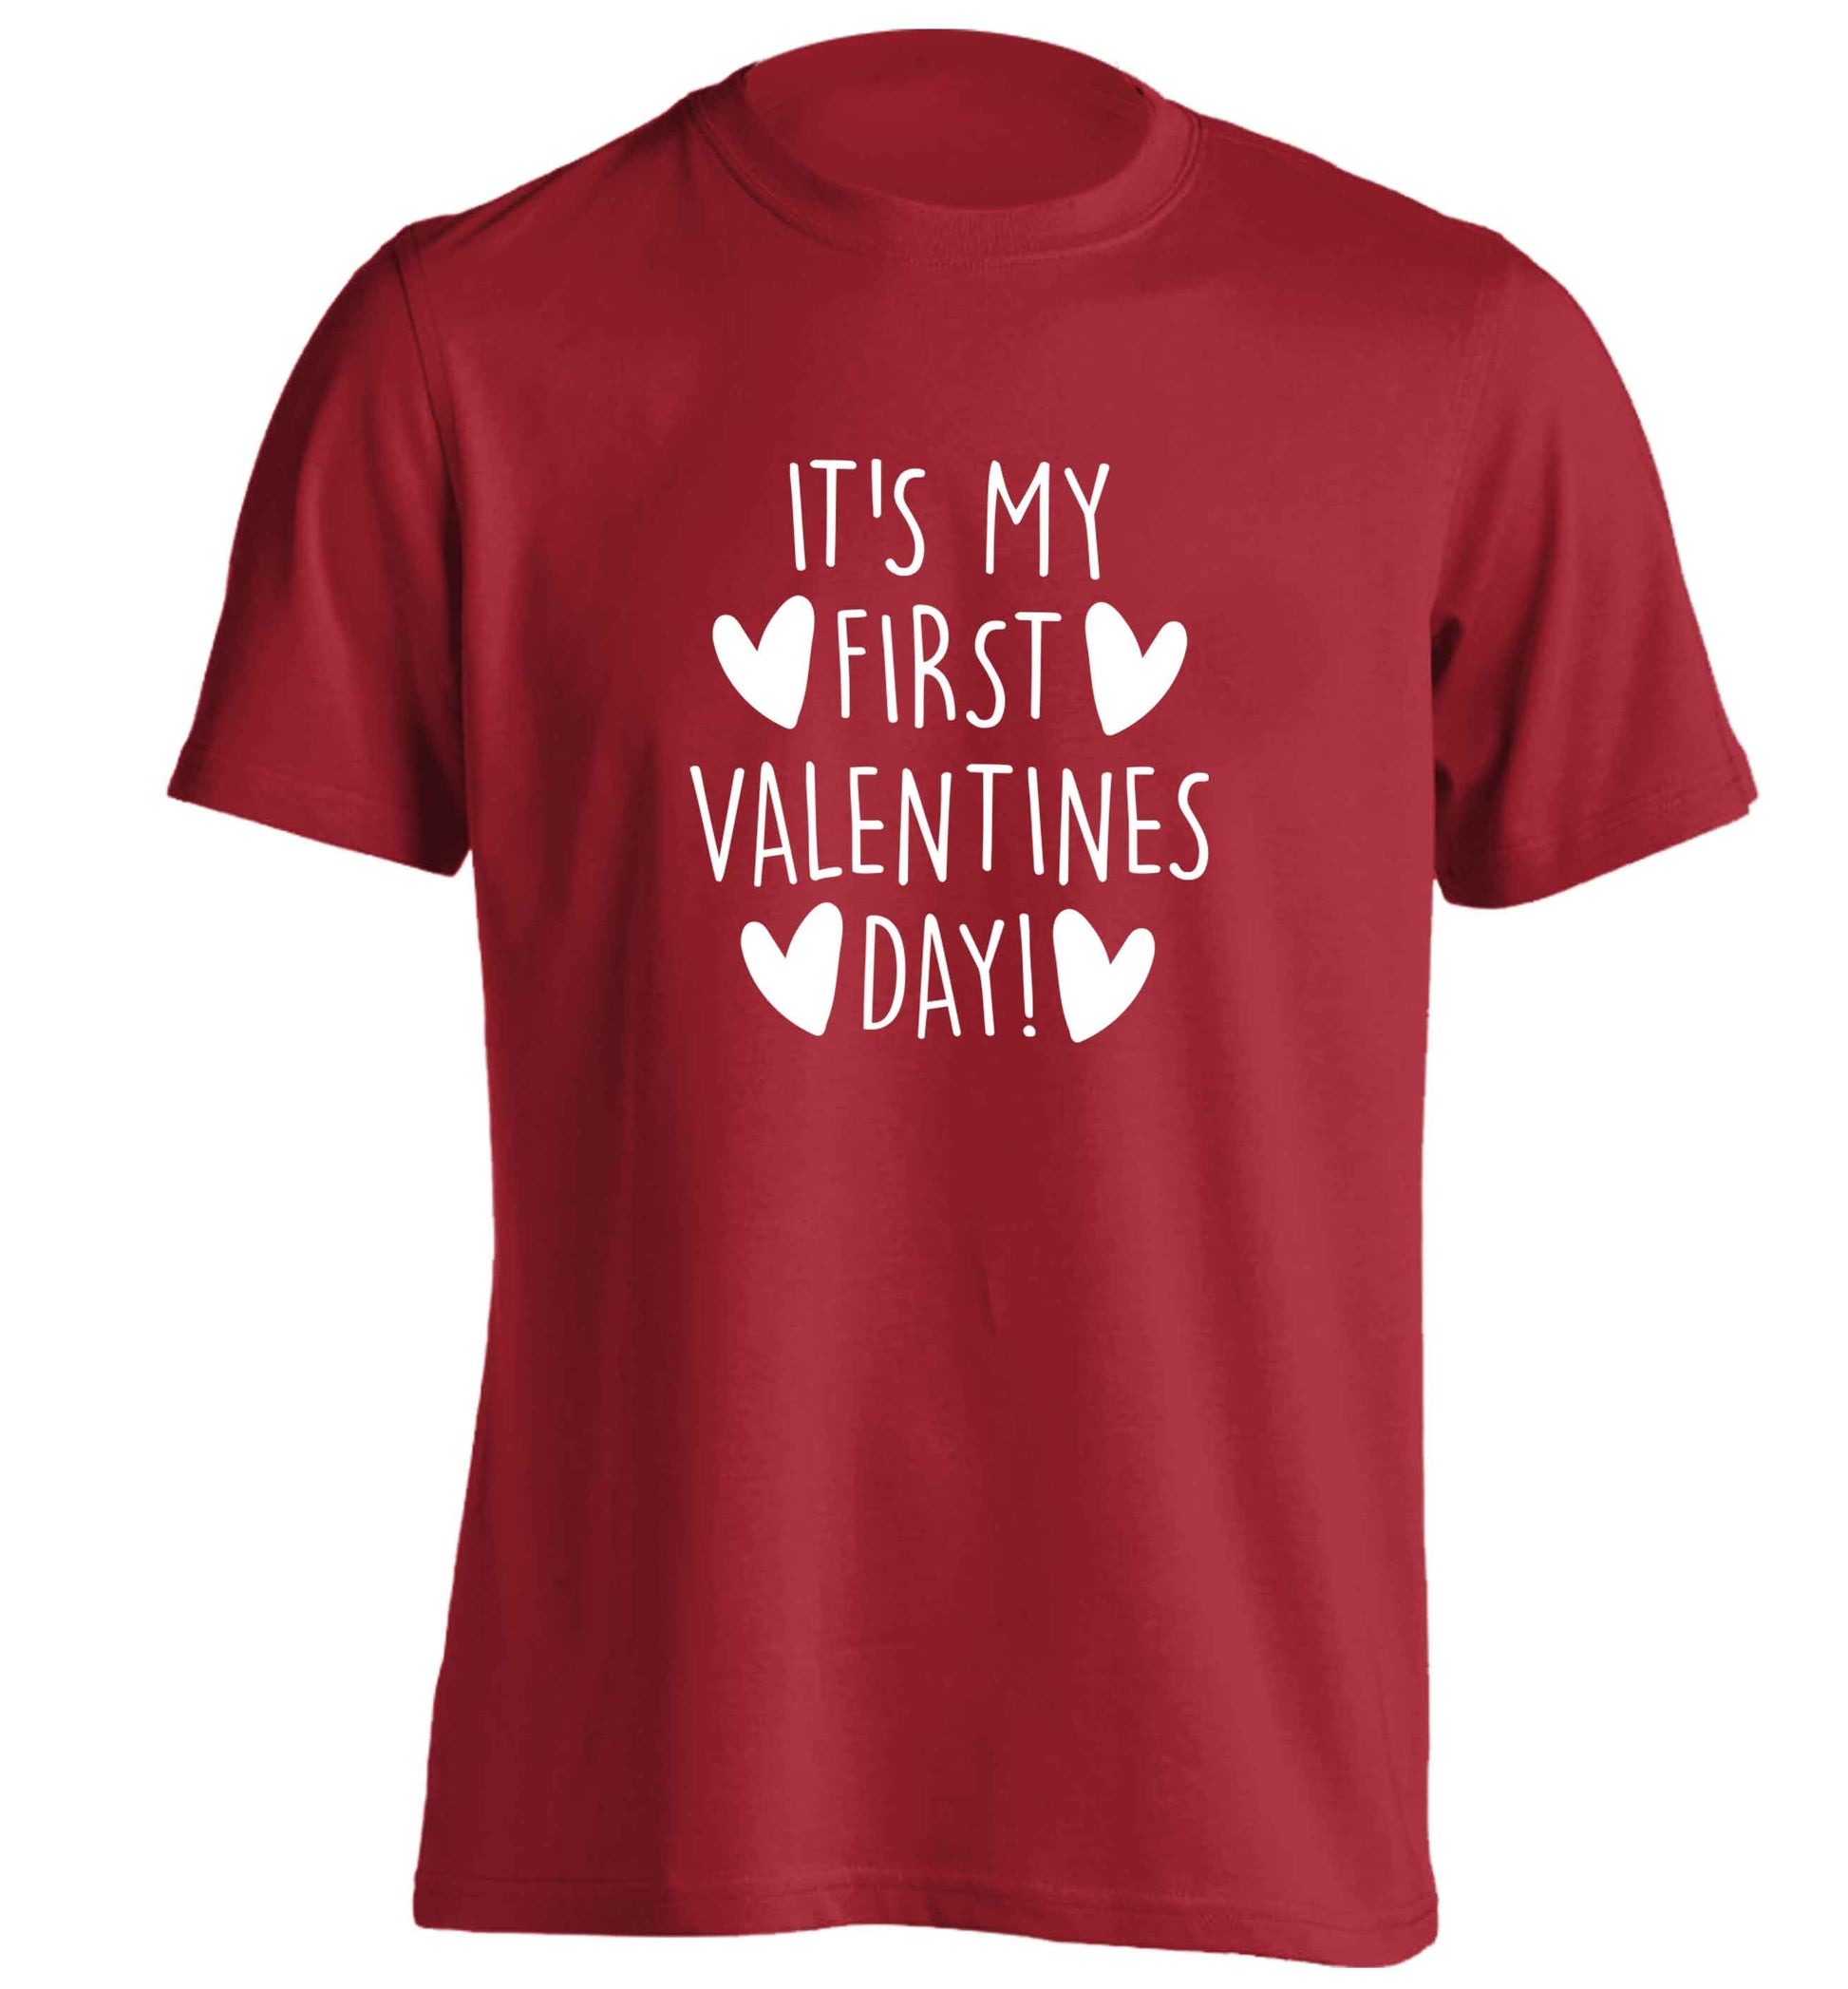 It's my first valentines day! adults unisex red Tshirt 2XL